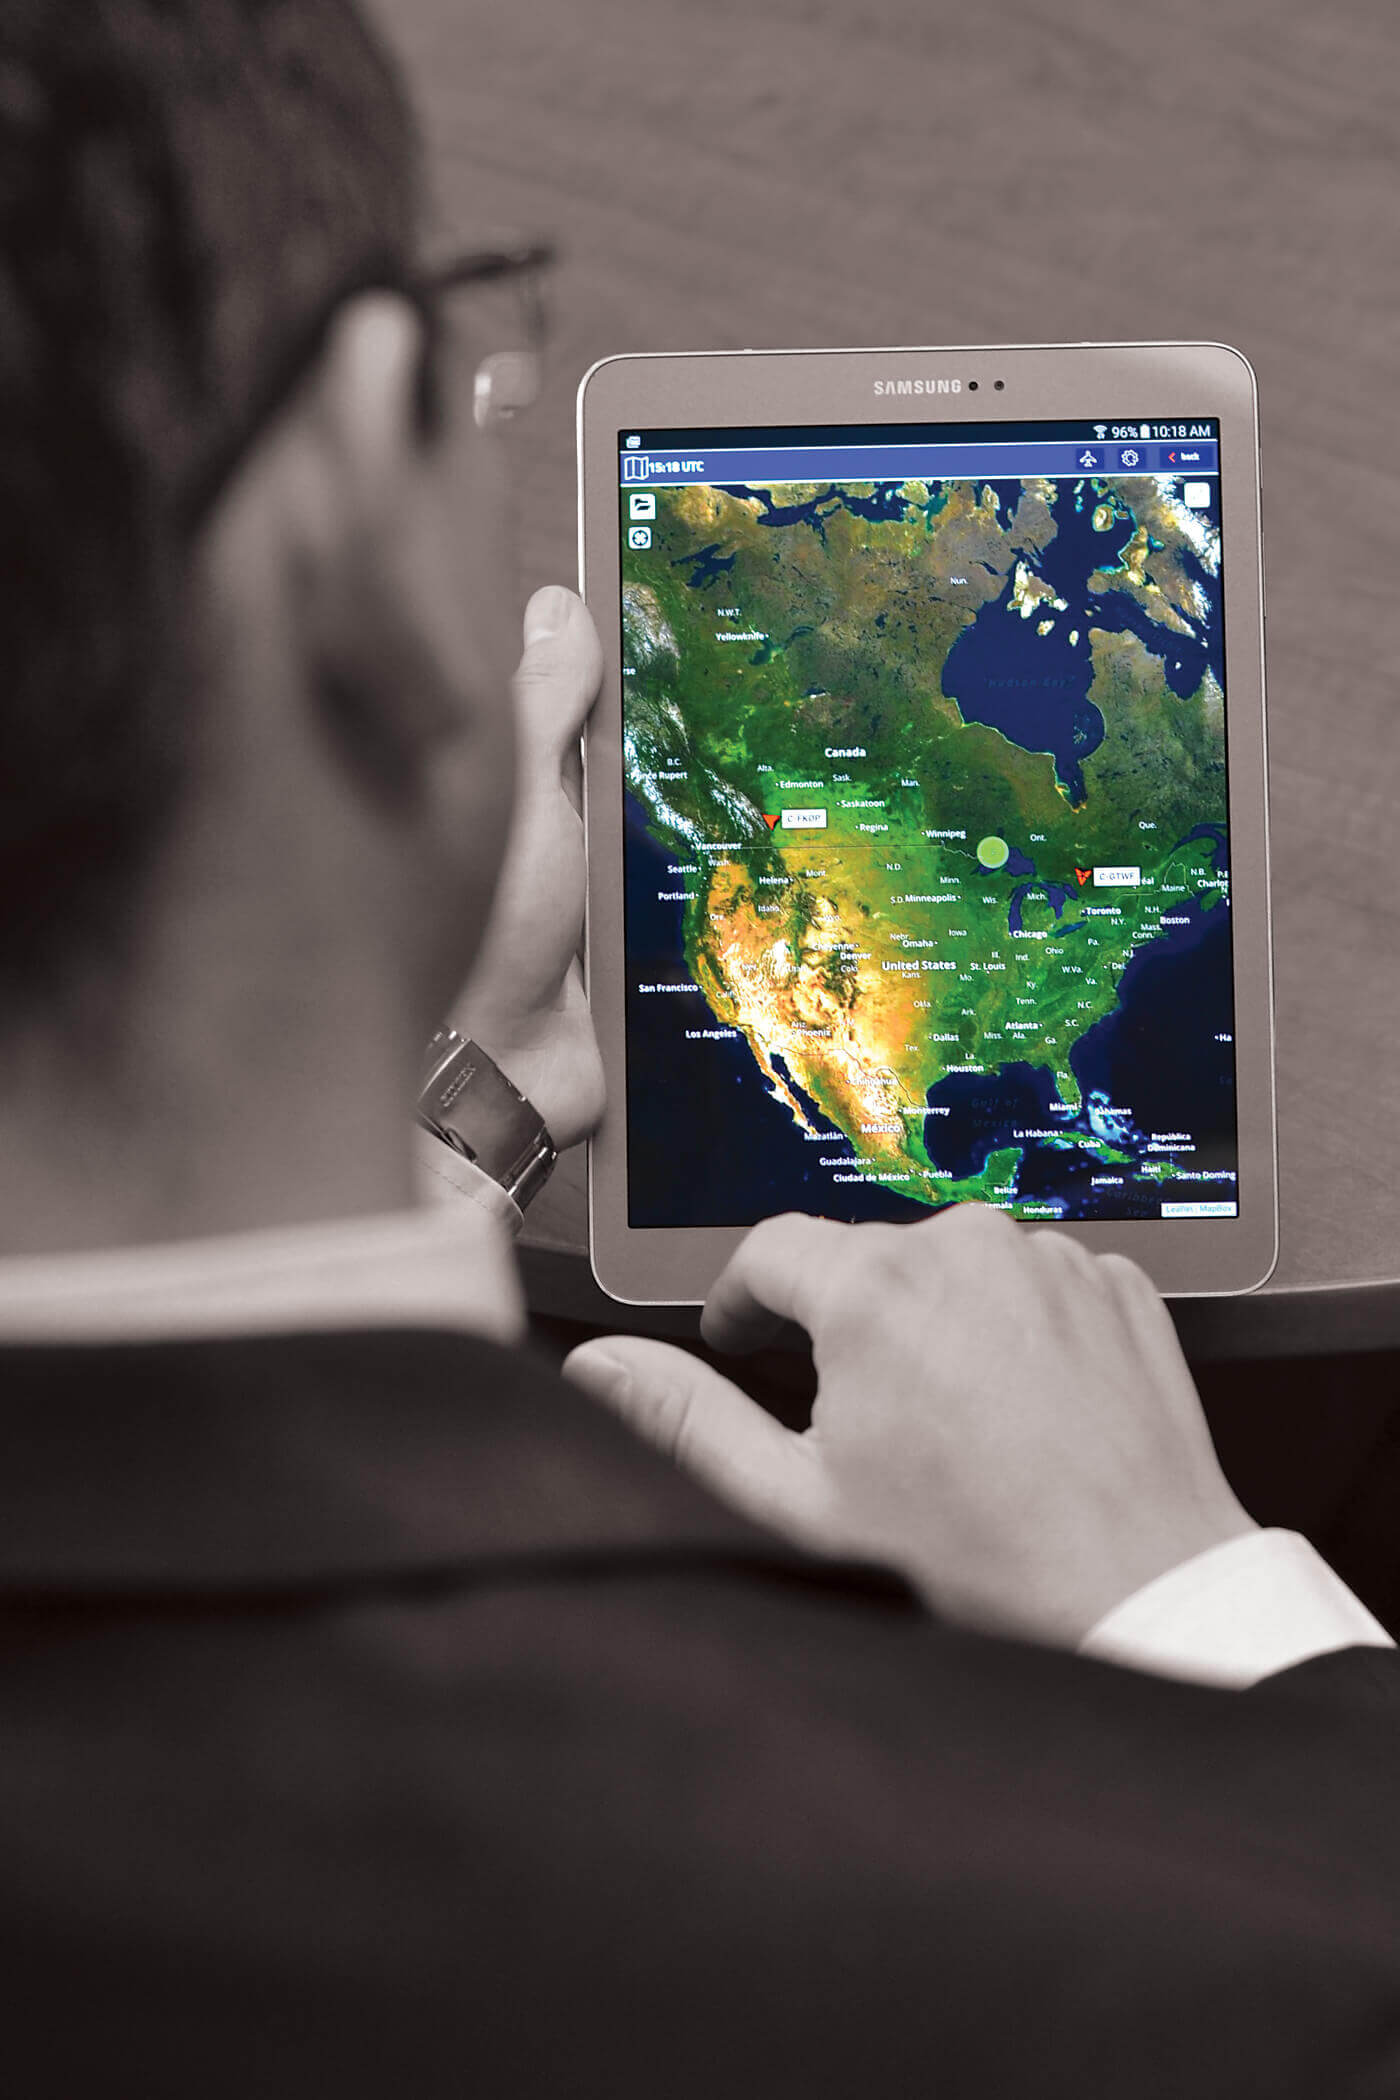 AirSuite’s Cirro app records, calculates, stores, and retrieves every aspect of flight operations.